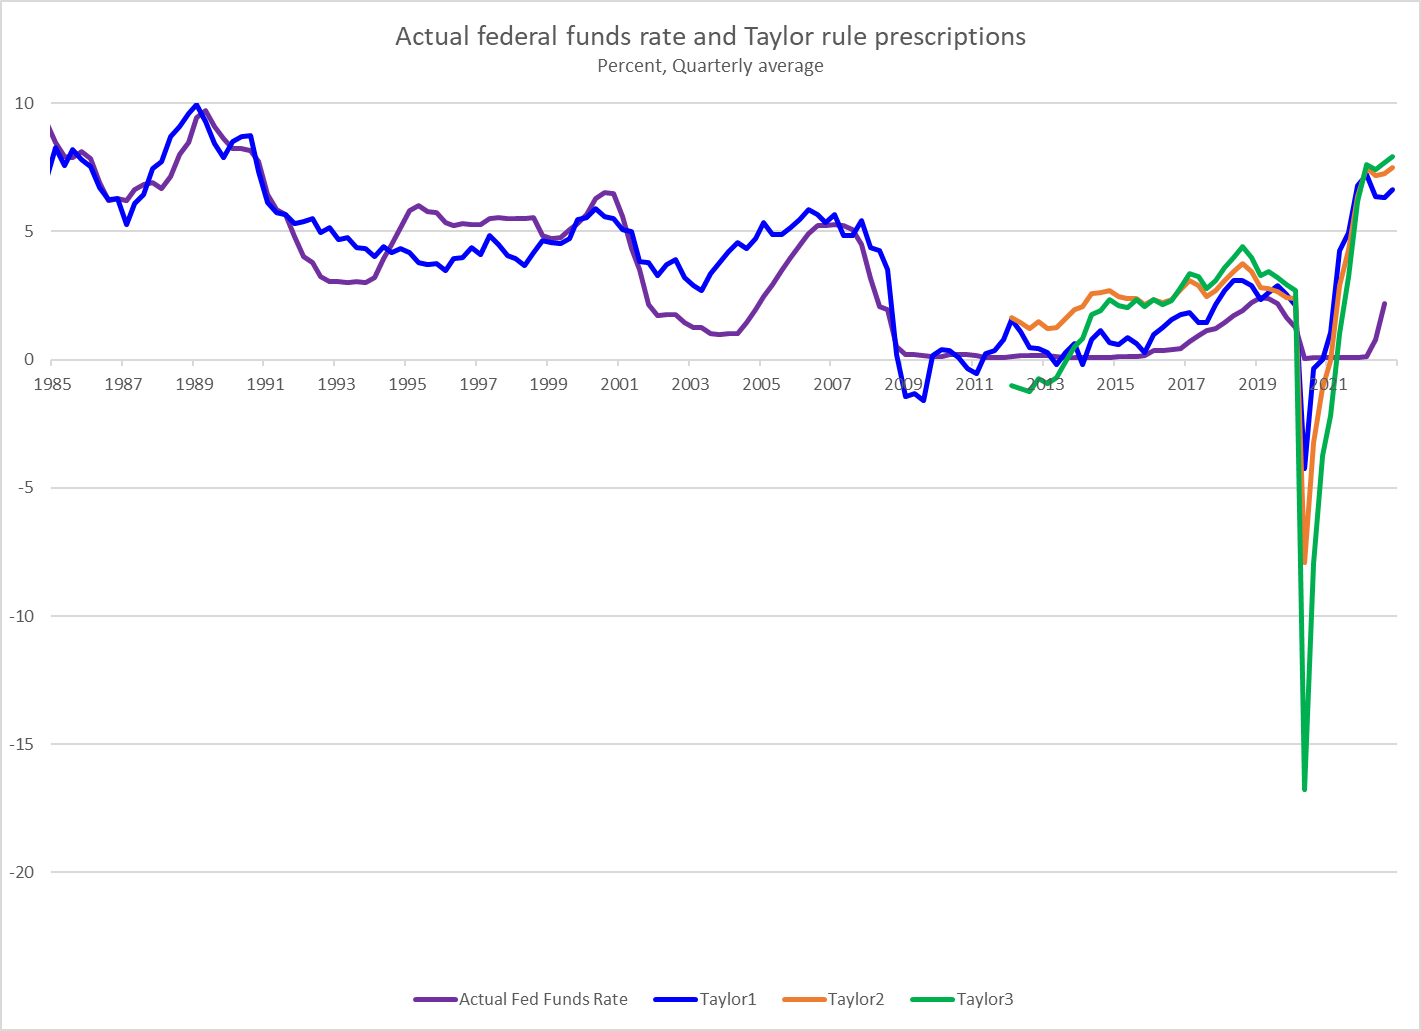 Actual Fed Funds Rates and Taylor Rule Prescriptions